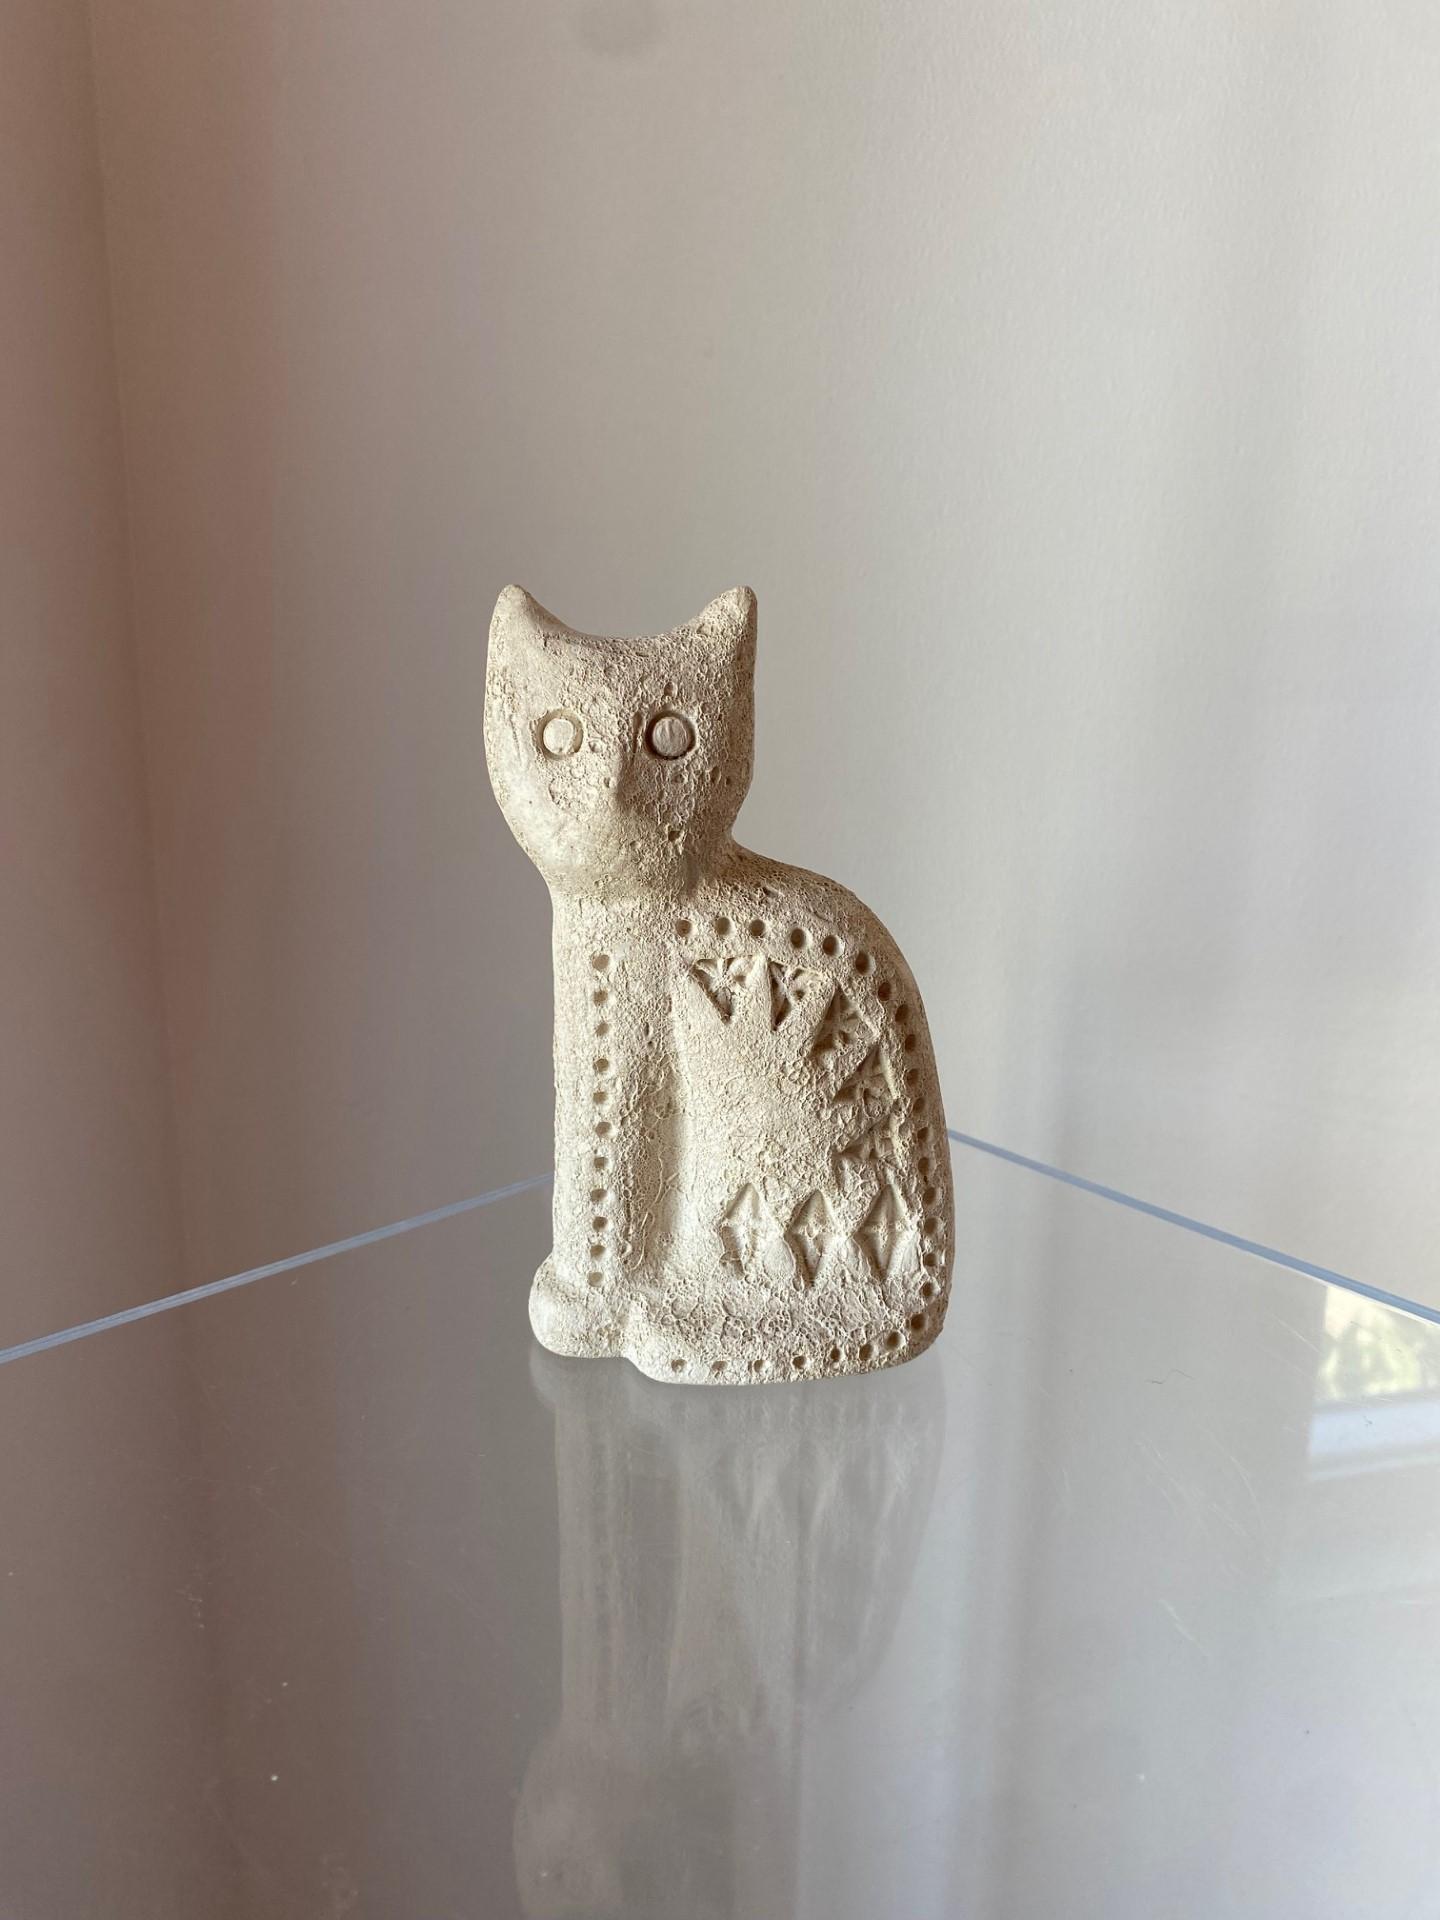 This vintage Flavia Montelupo Ceramic Cat is a beautiful addition to any collection. Made in Italy by Aldo Londi (Bitossi), this unglazed figurine showcases the intricate details of a cat. The ceramic material adds a touch of elegance to any room